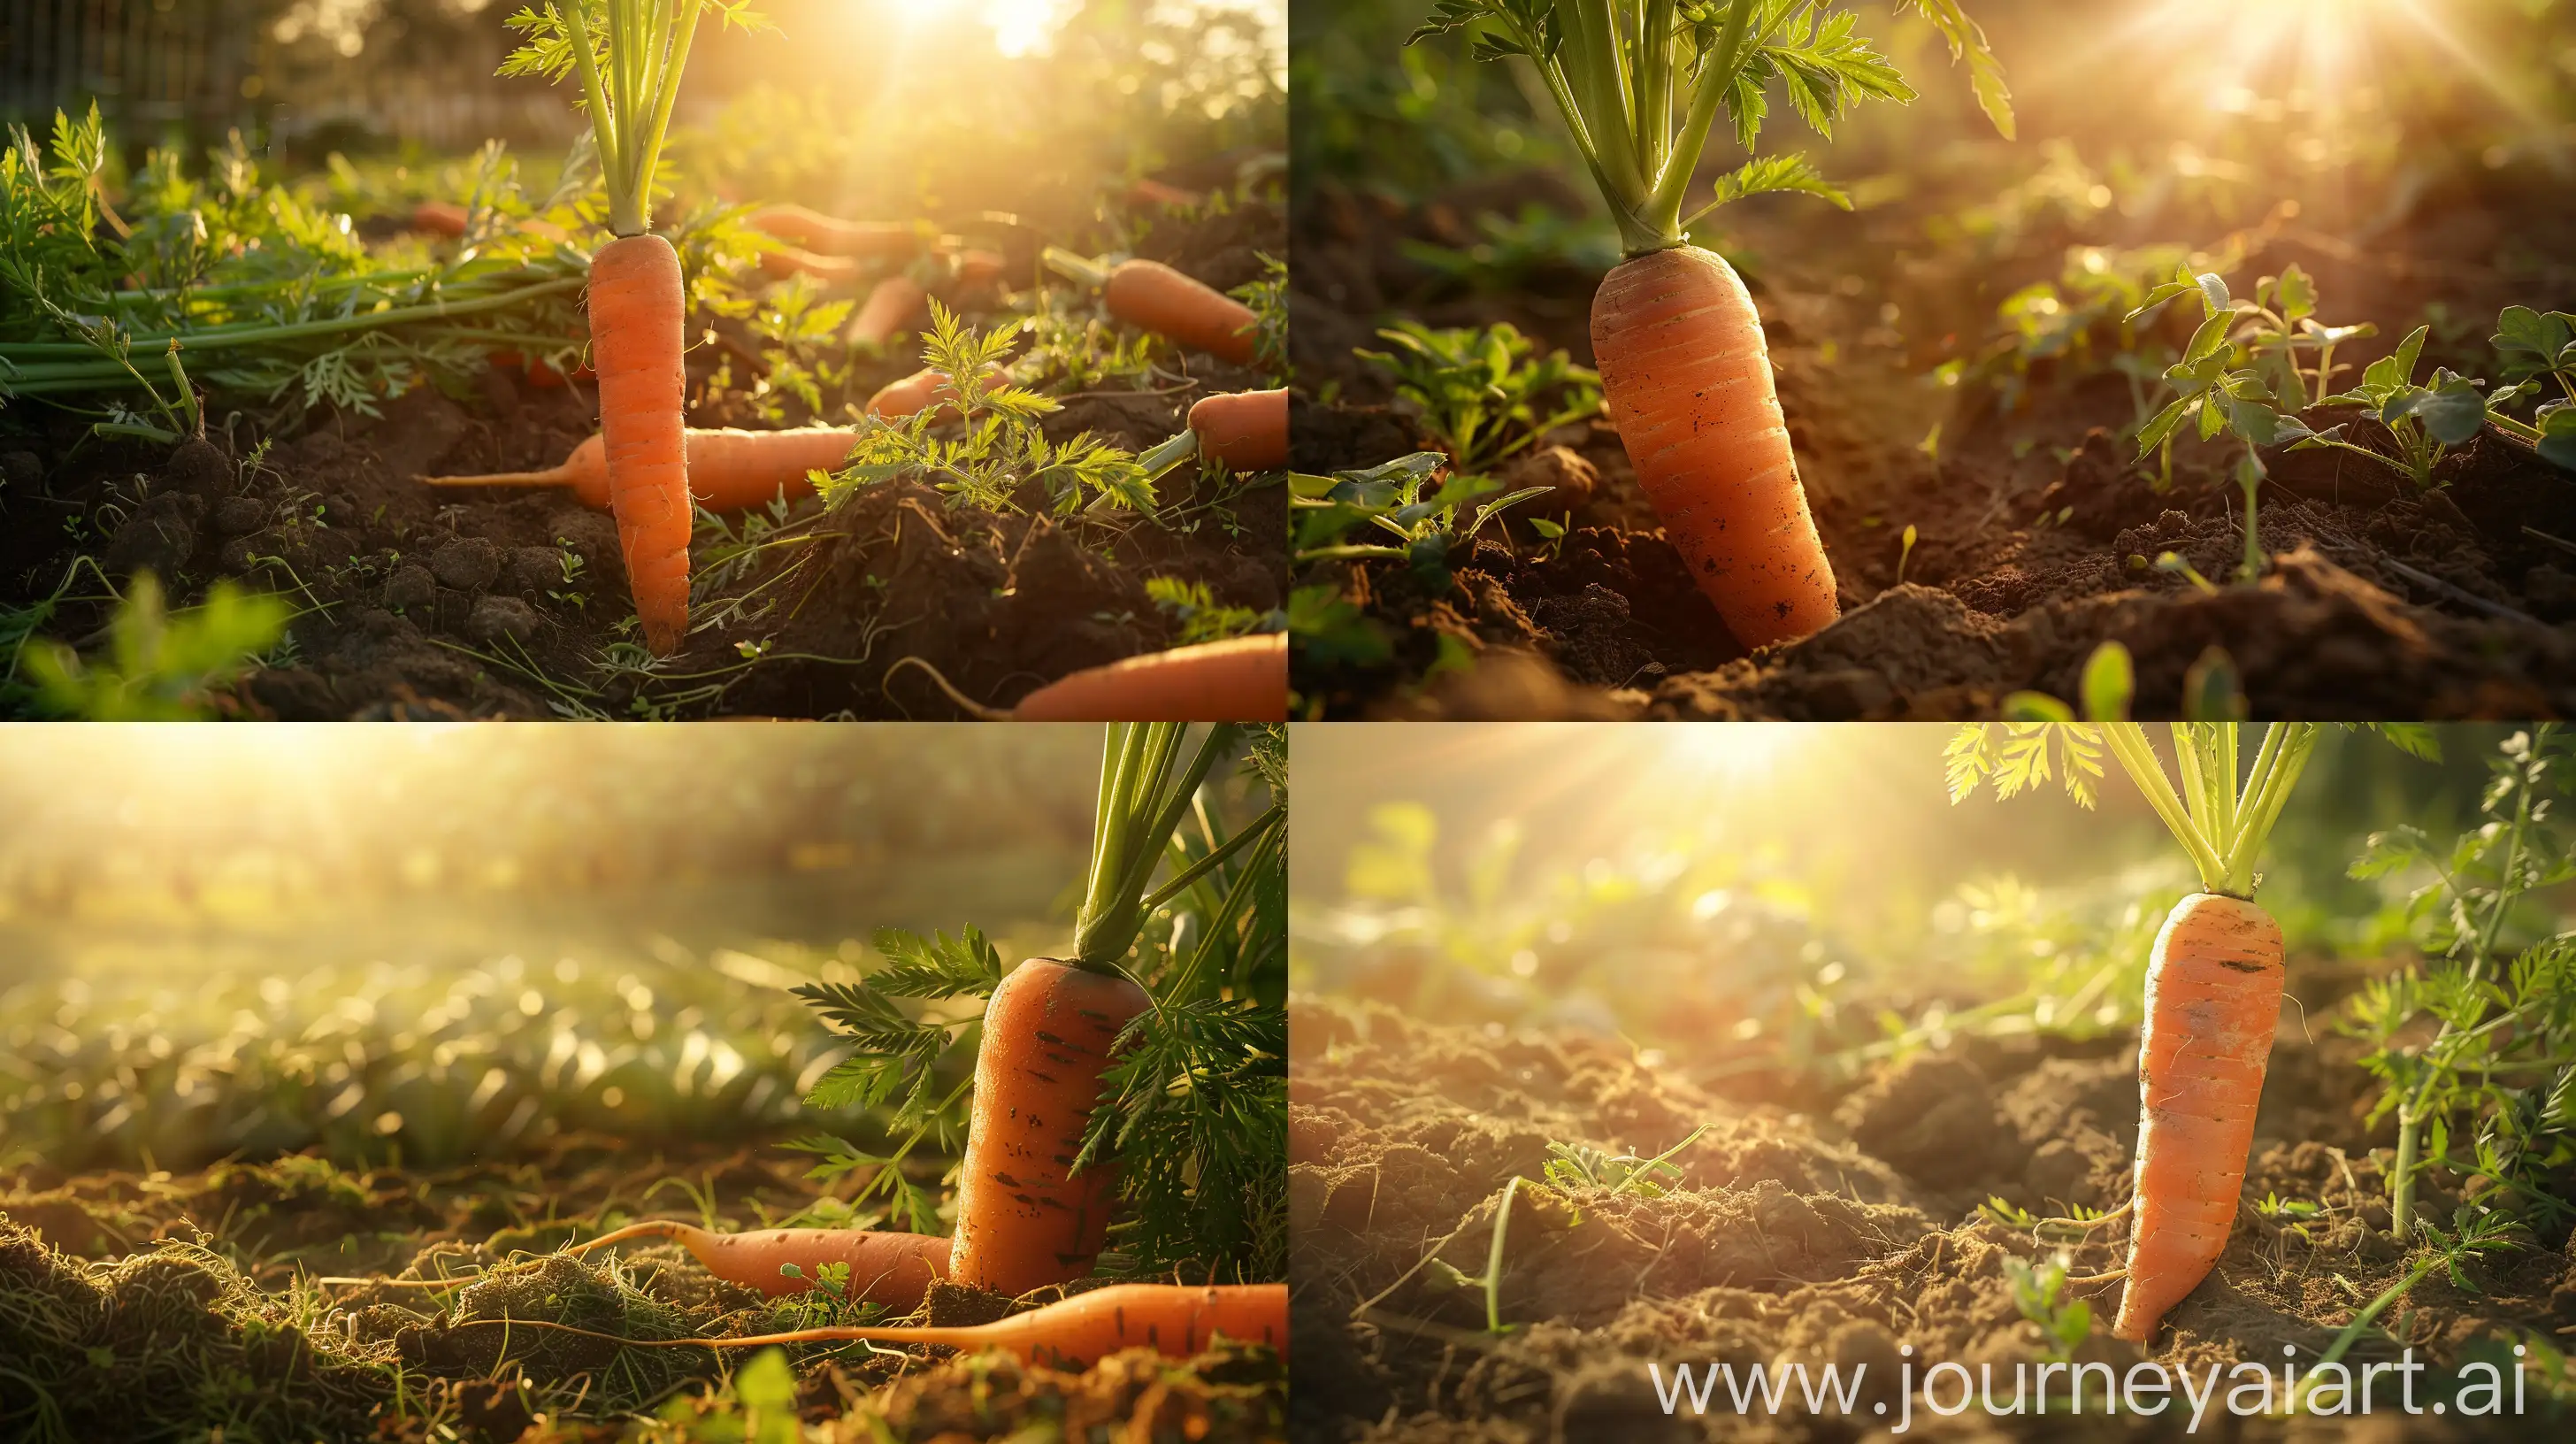 High detailed photo capturing a Carrot, Candysnax Hybrid. The sun, casting a warm, golden glow, bathes the scene in a serene ambiance, illuminating the intricate details of each element. The composition centers on a Carrot, Candysnax Hybrid. Sweet and crunchy as hard candy, this Imperator type carrot is straight and slender, with deep-orange roots up to 12 inches long and 1 inch wide. The hybrid vigor produces high quality roots with wonderful texture, crunchy and with excellent flavor. Harve. The image evokes a sense of tranquility and natural beauty, inviting viewers to immerse themselves in the splendor of the landscape. --ar 16:9 